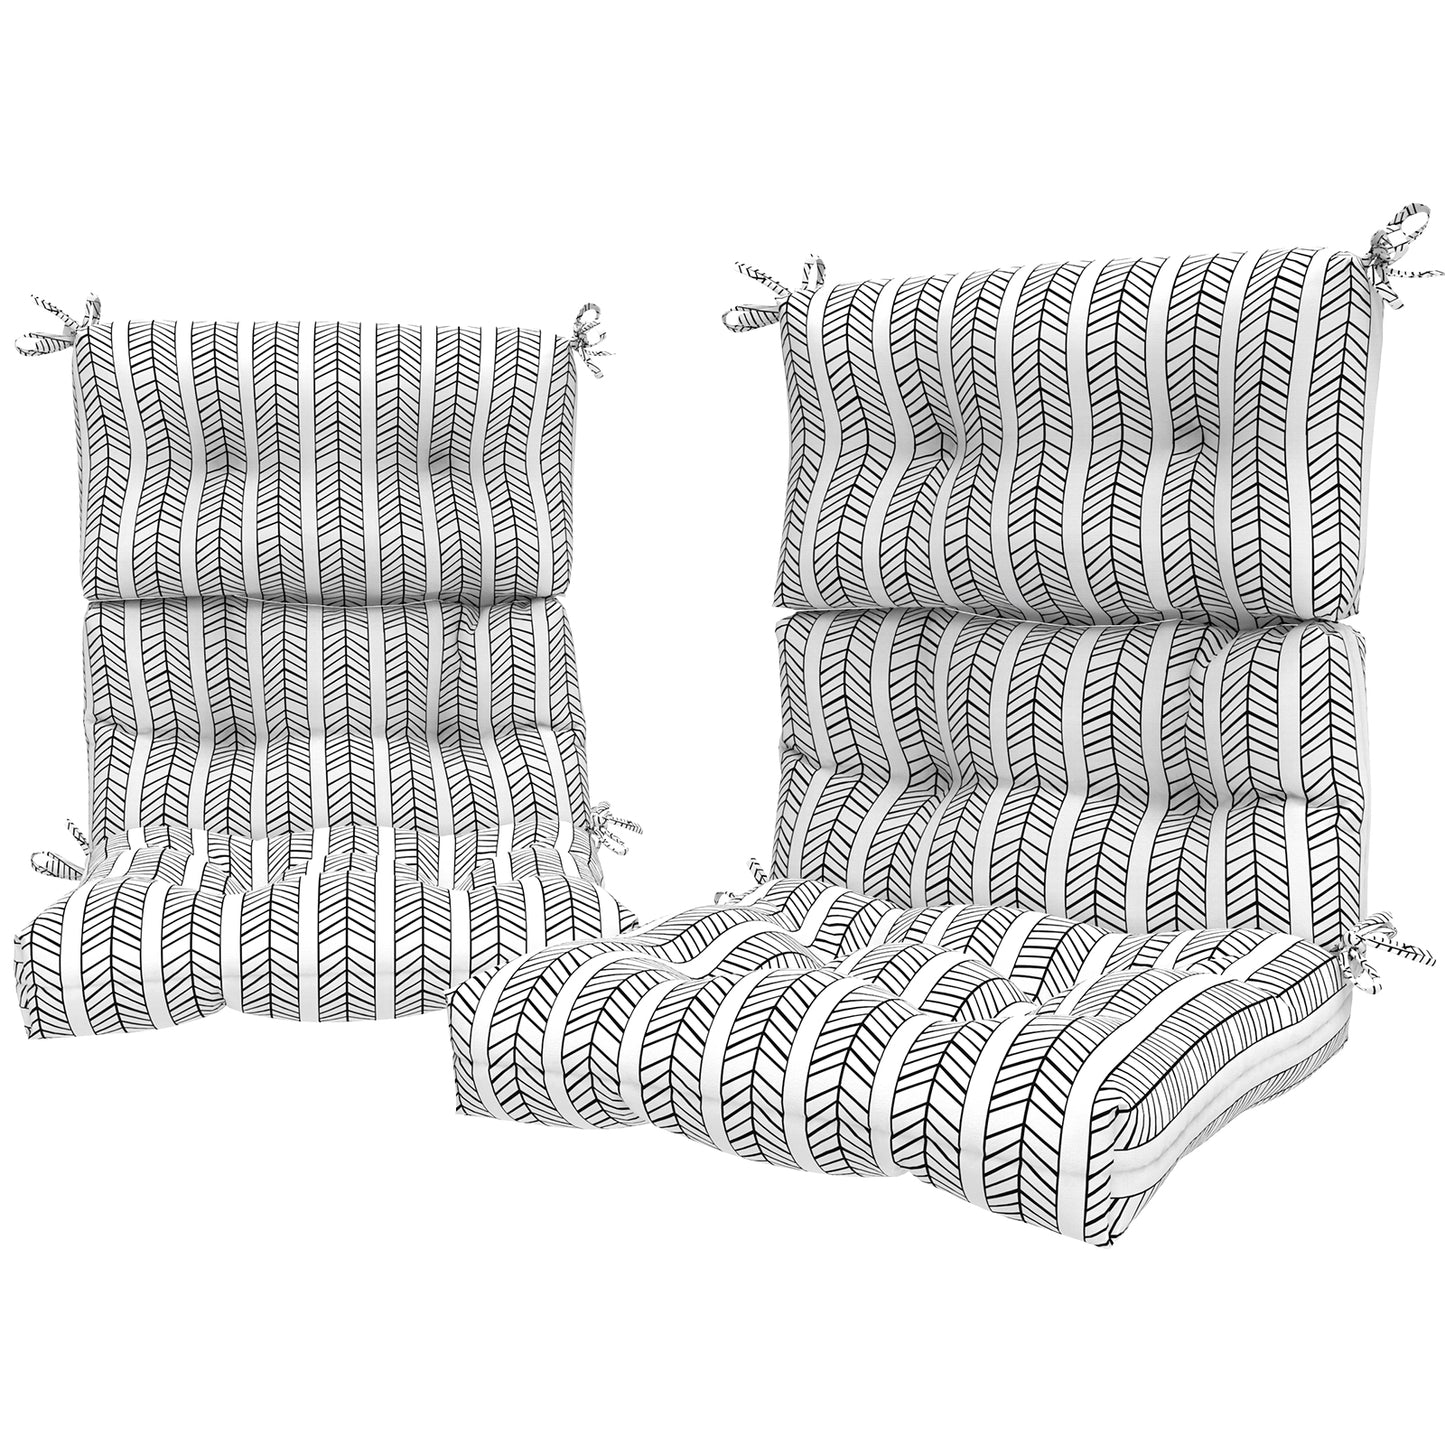 Melody Elephant Outdoor Tufted High Back Chair Cushions, Water Resistant Rocking Seat Chair Cushions 2 Pack, Adirondack Cushions for Patio Home Garden, 22" W x 20" D, HerringboneWhite